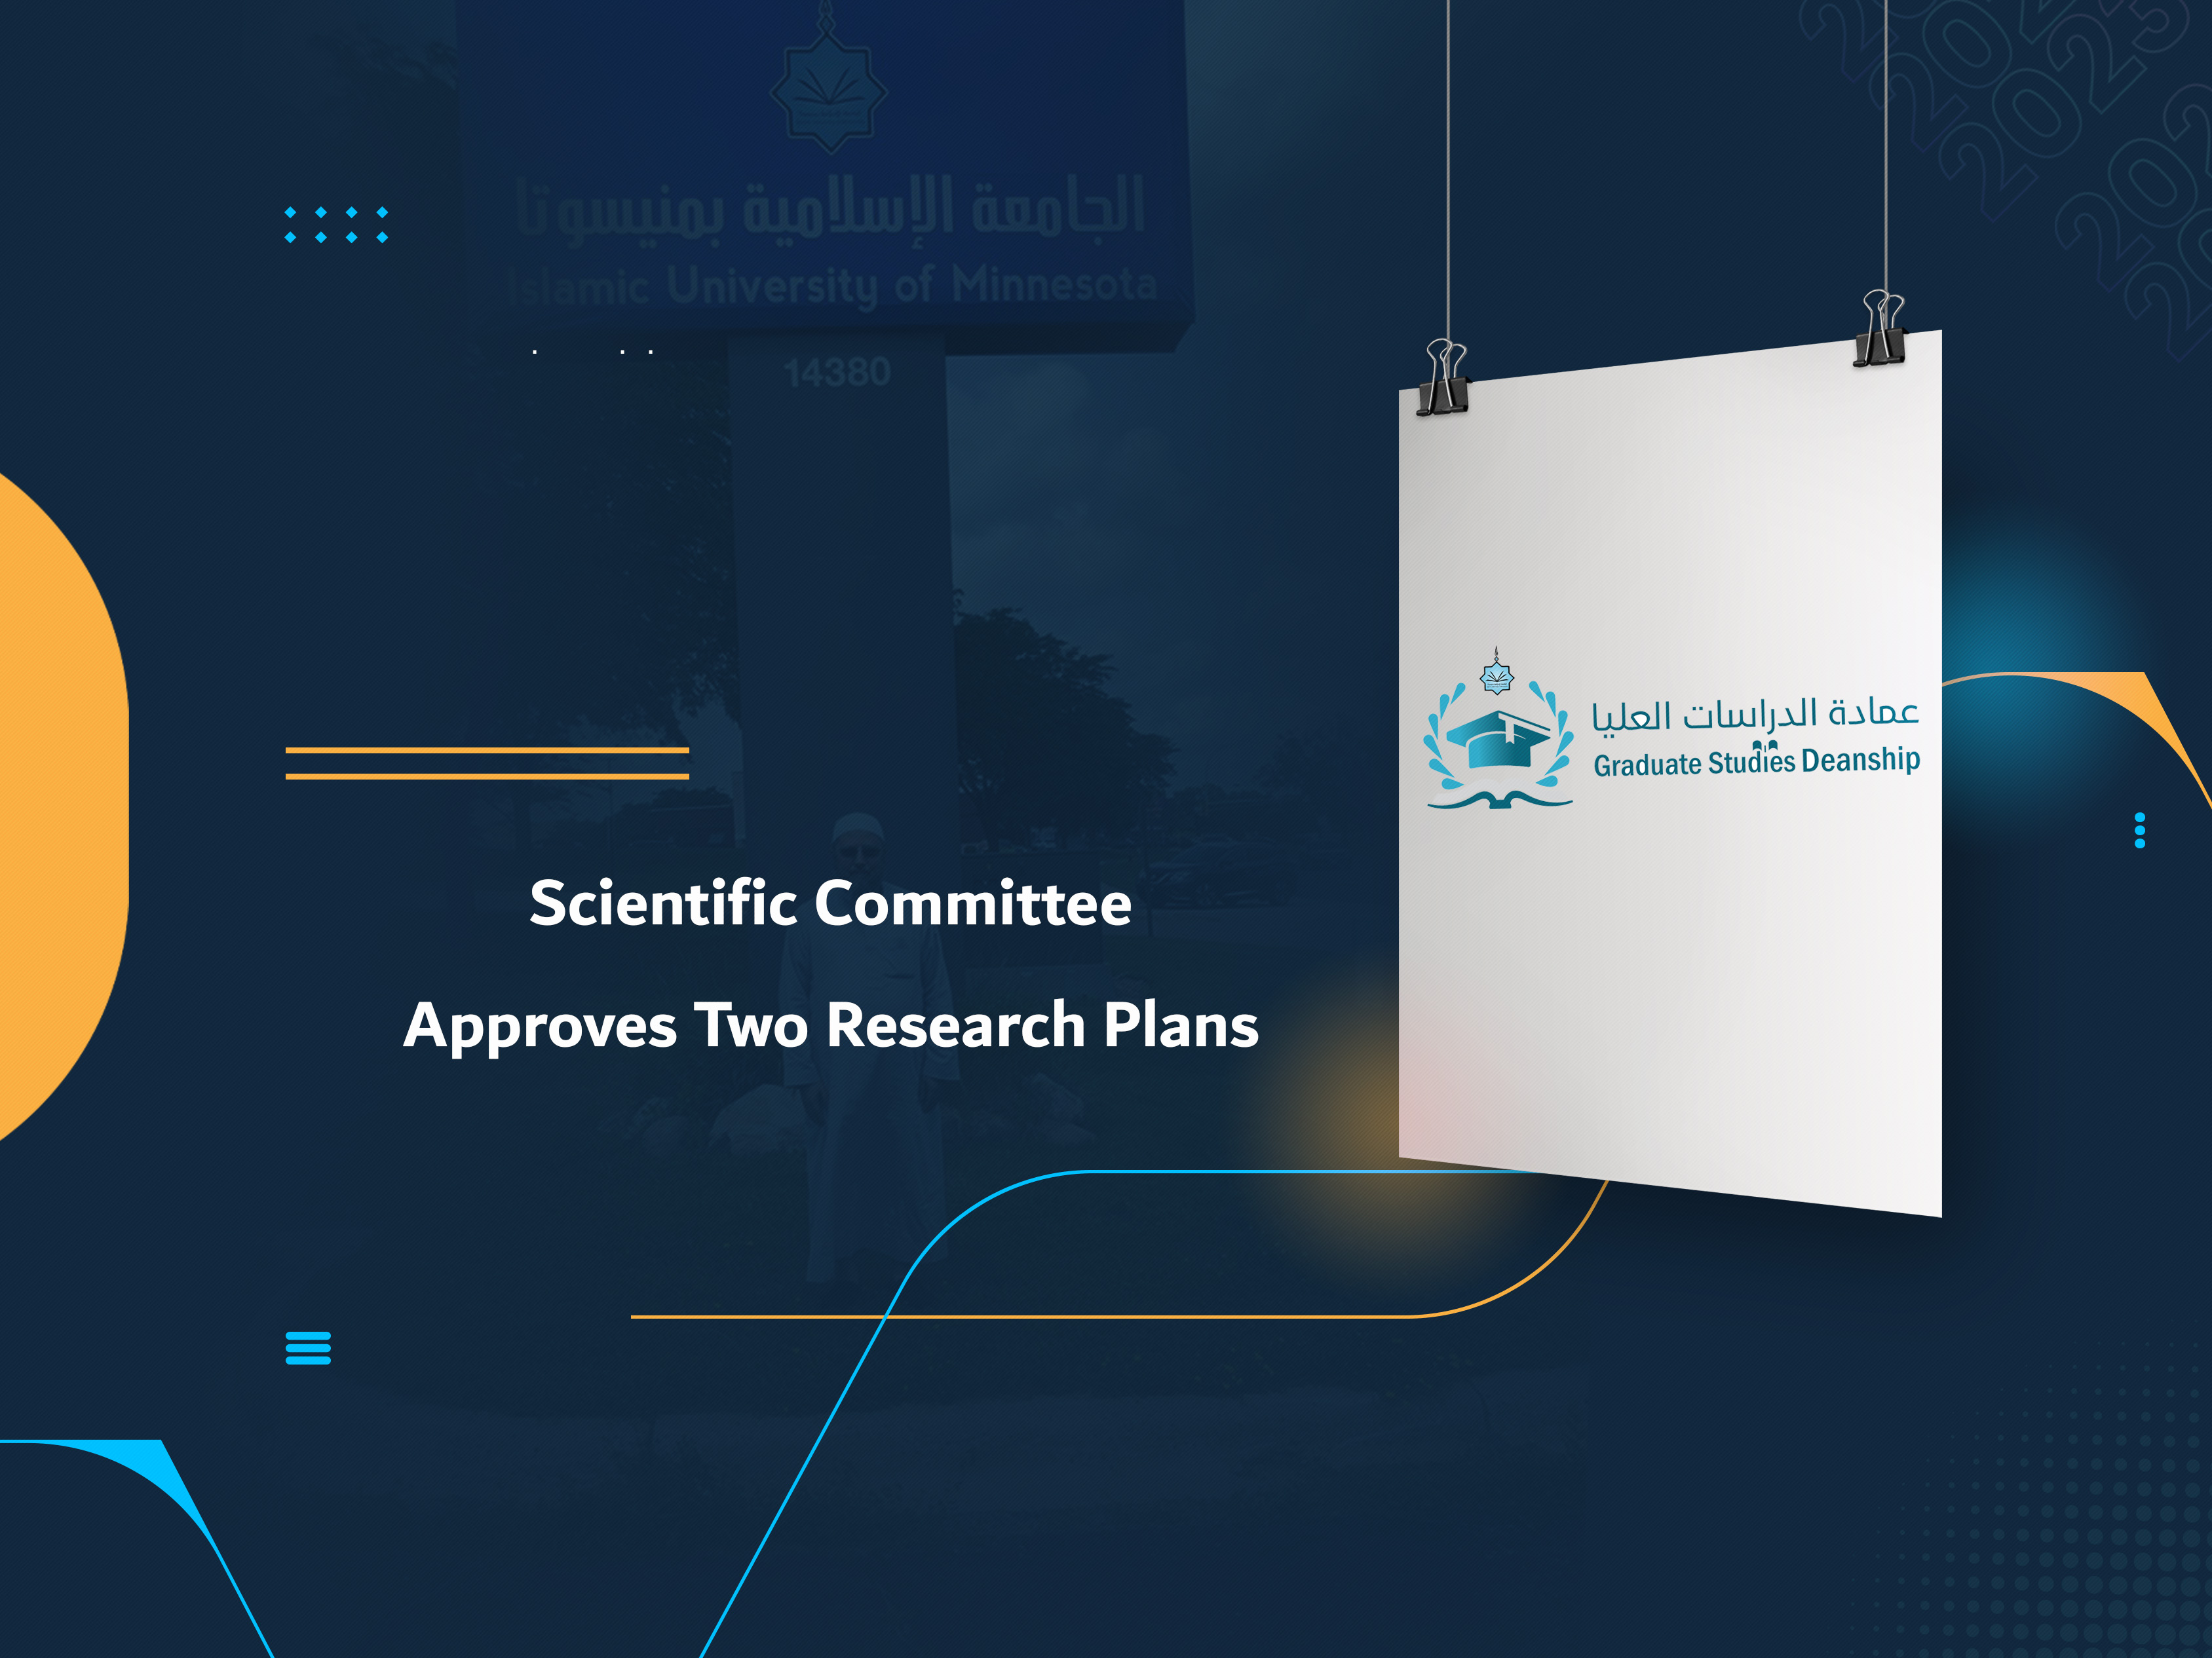 Scientific Committee Approves Two Research Plans